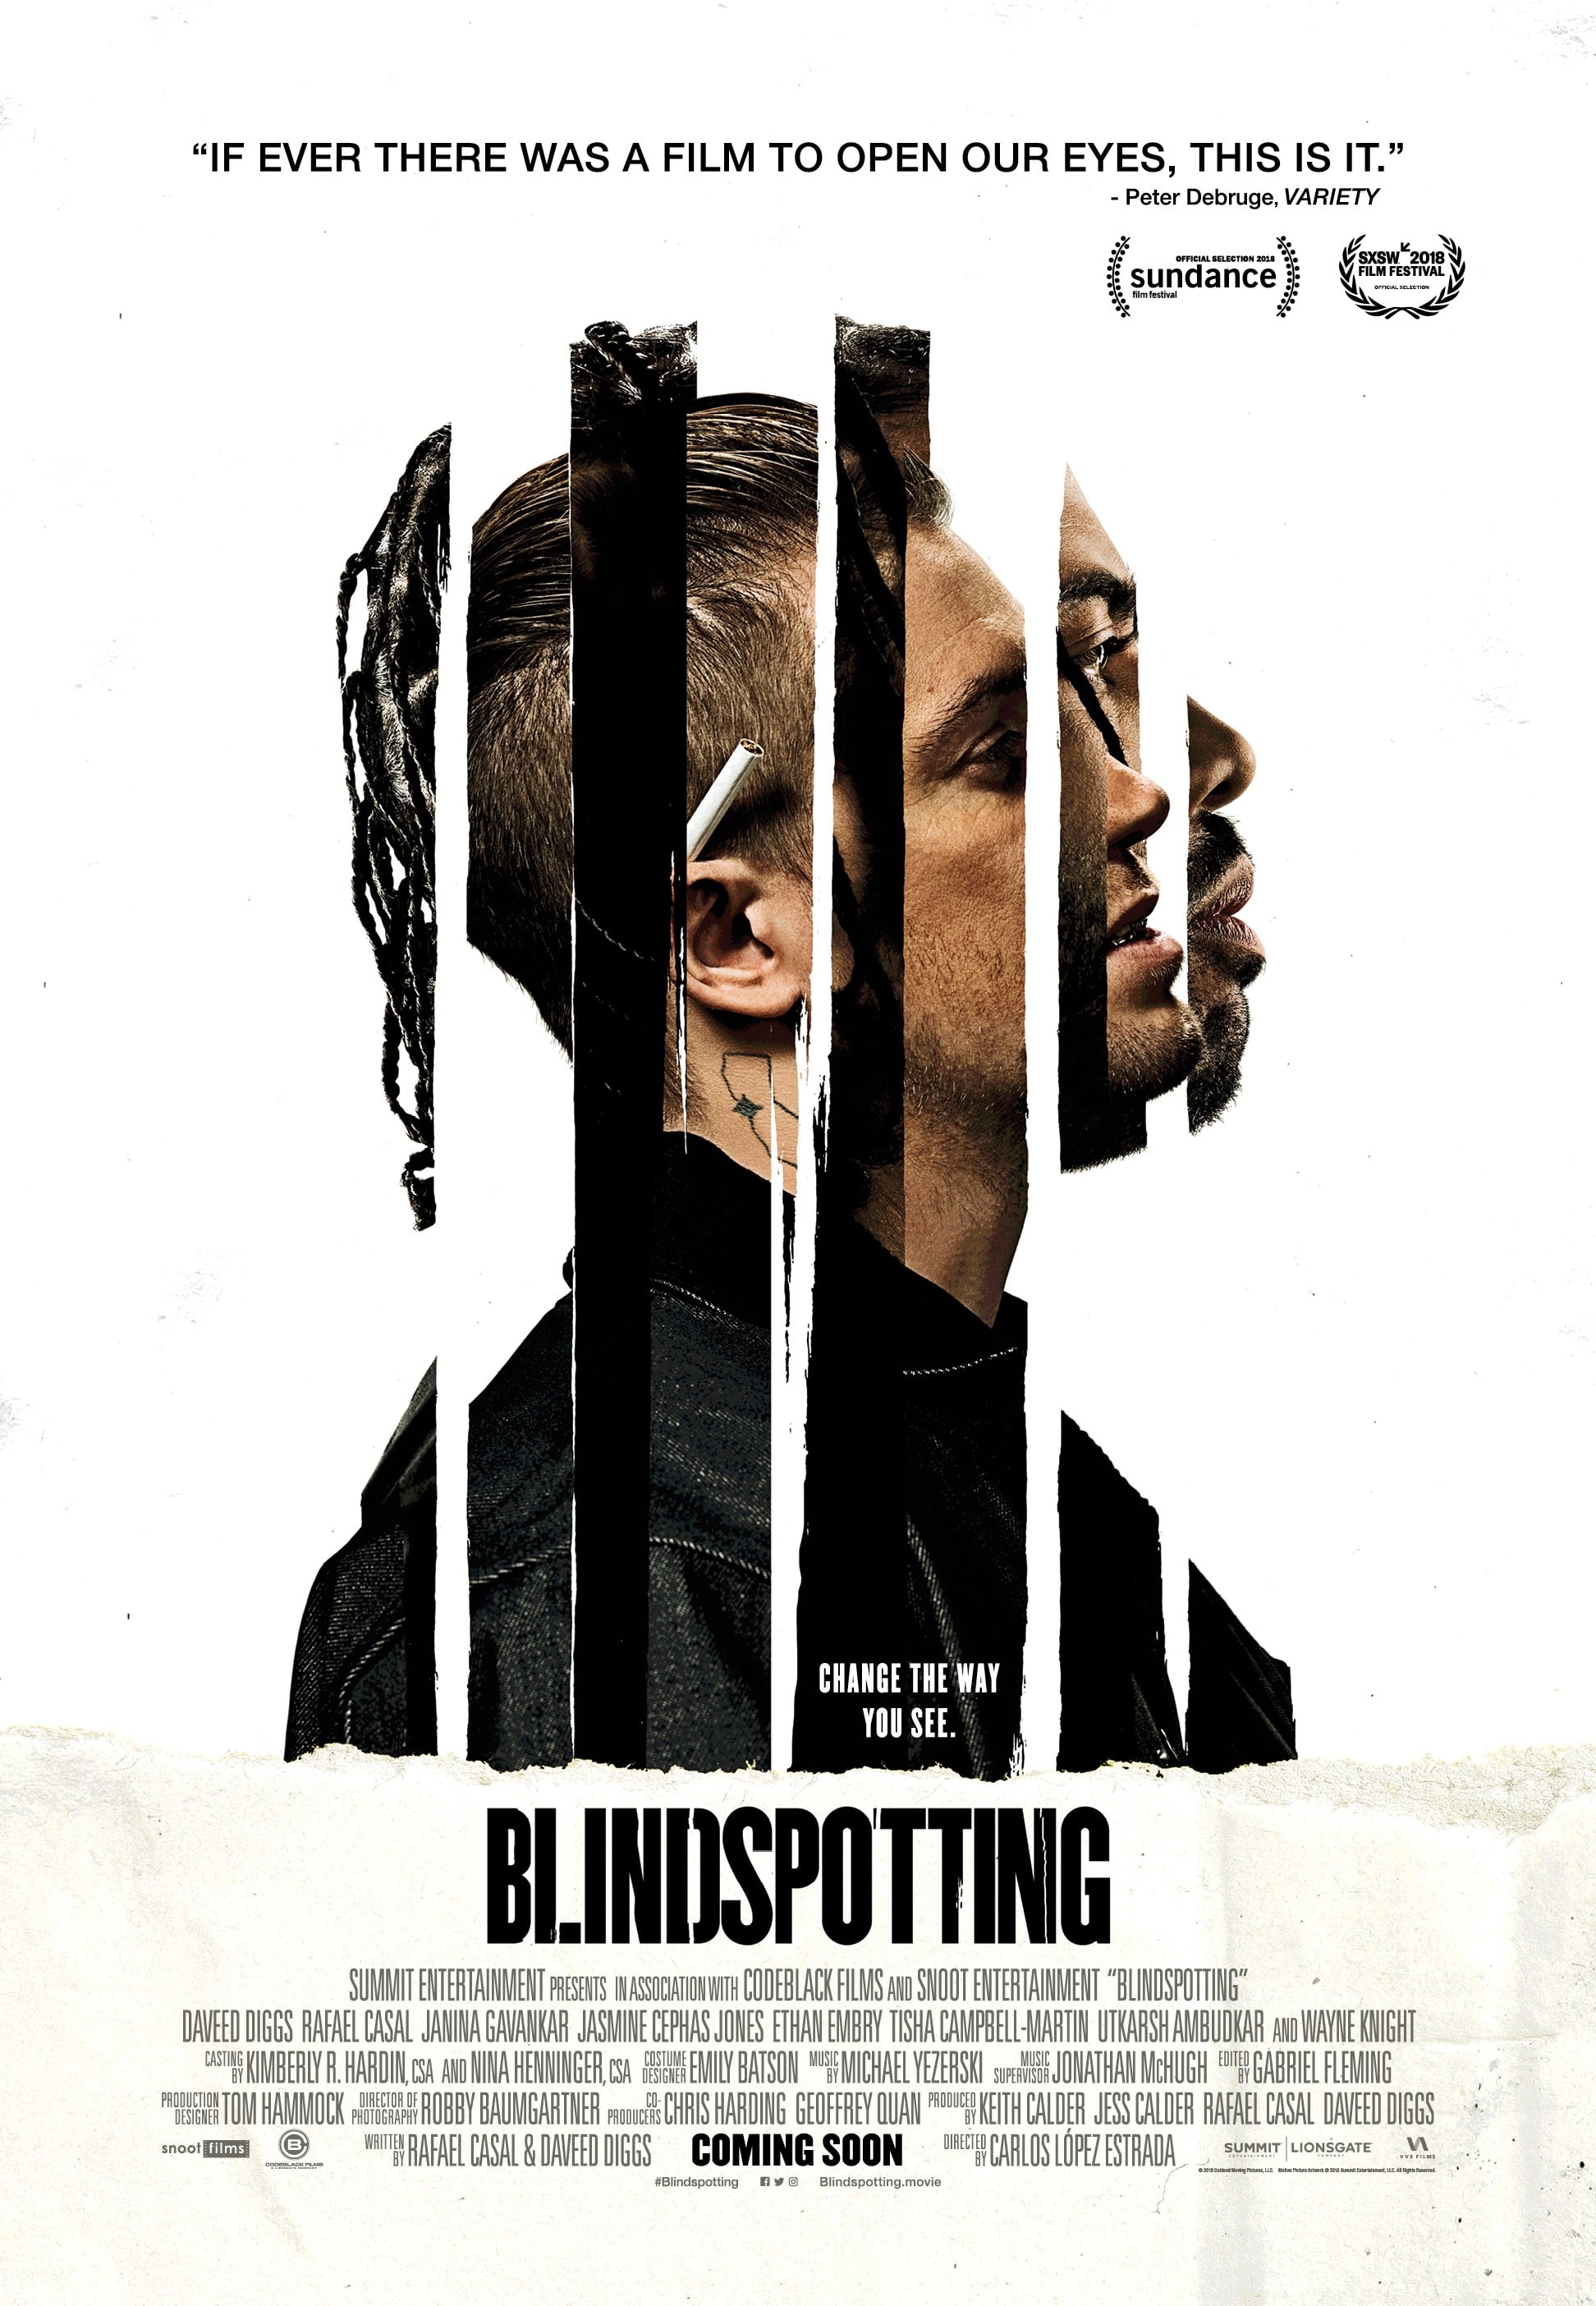 Win Passes to see an Advance Screening of Blindspotting